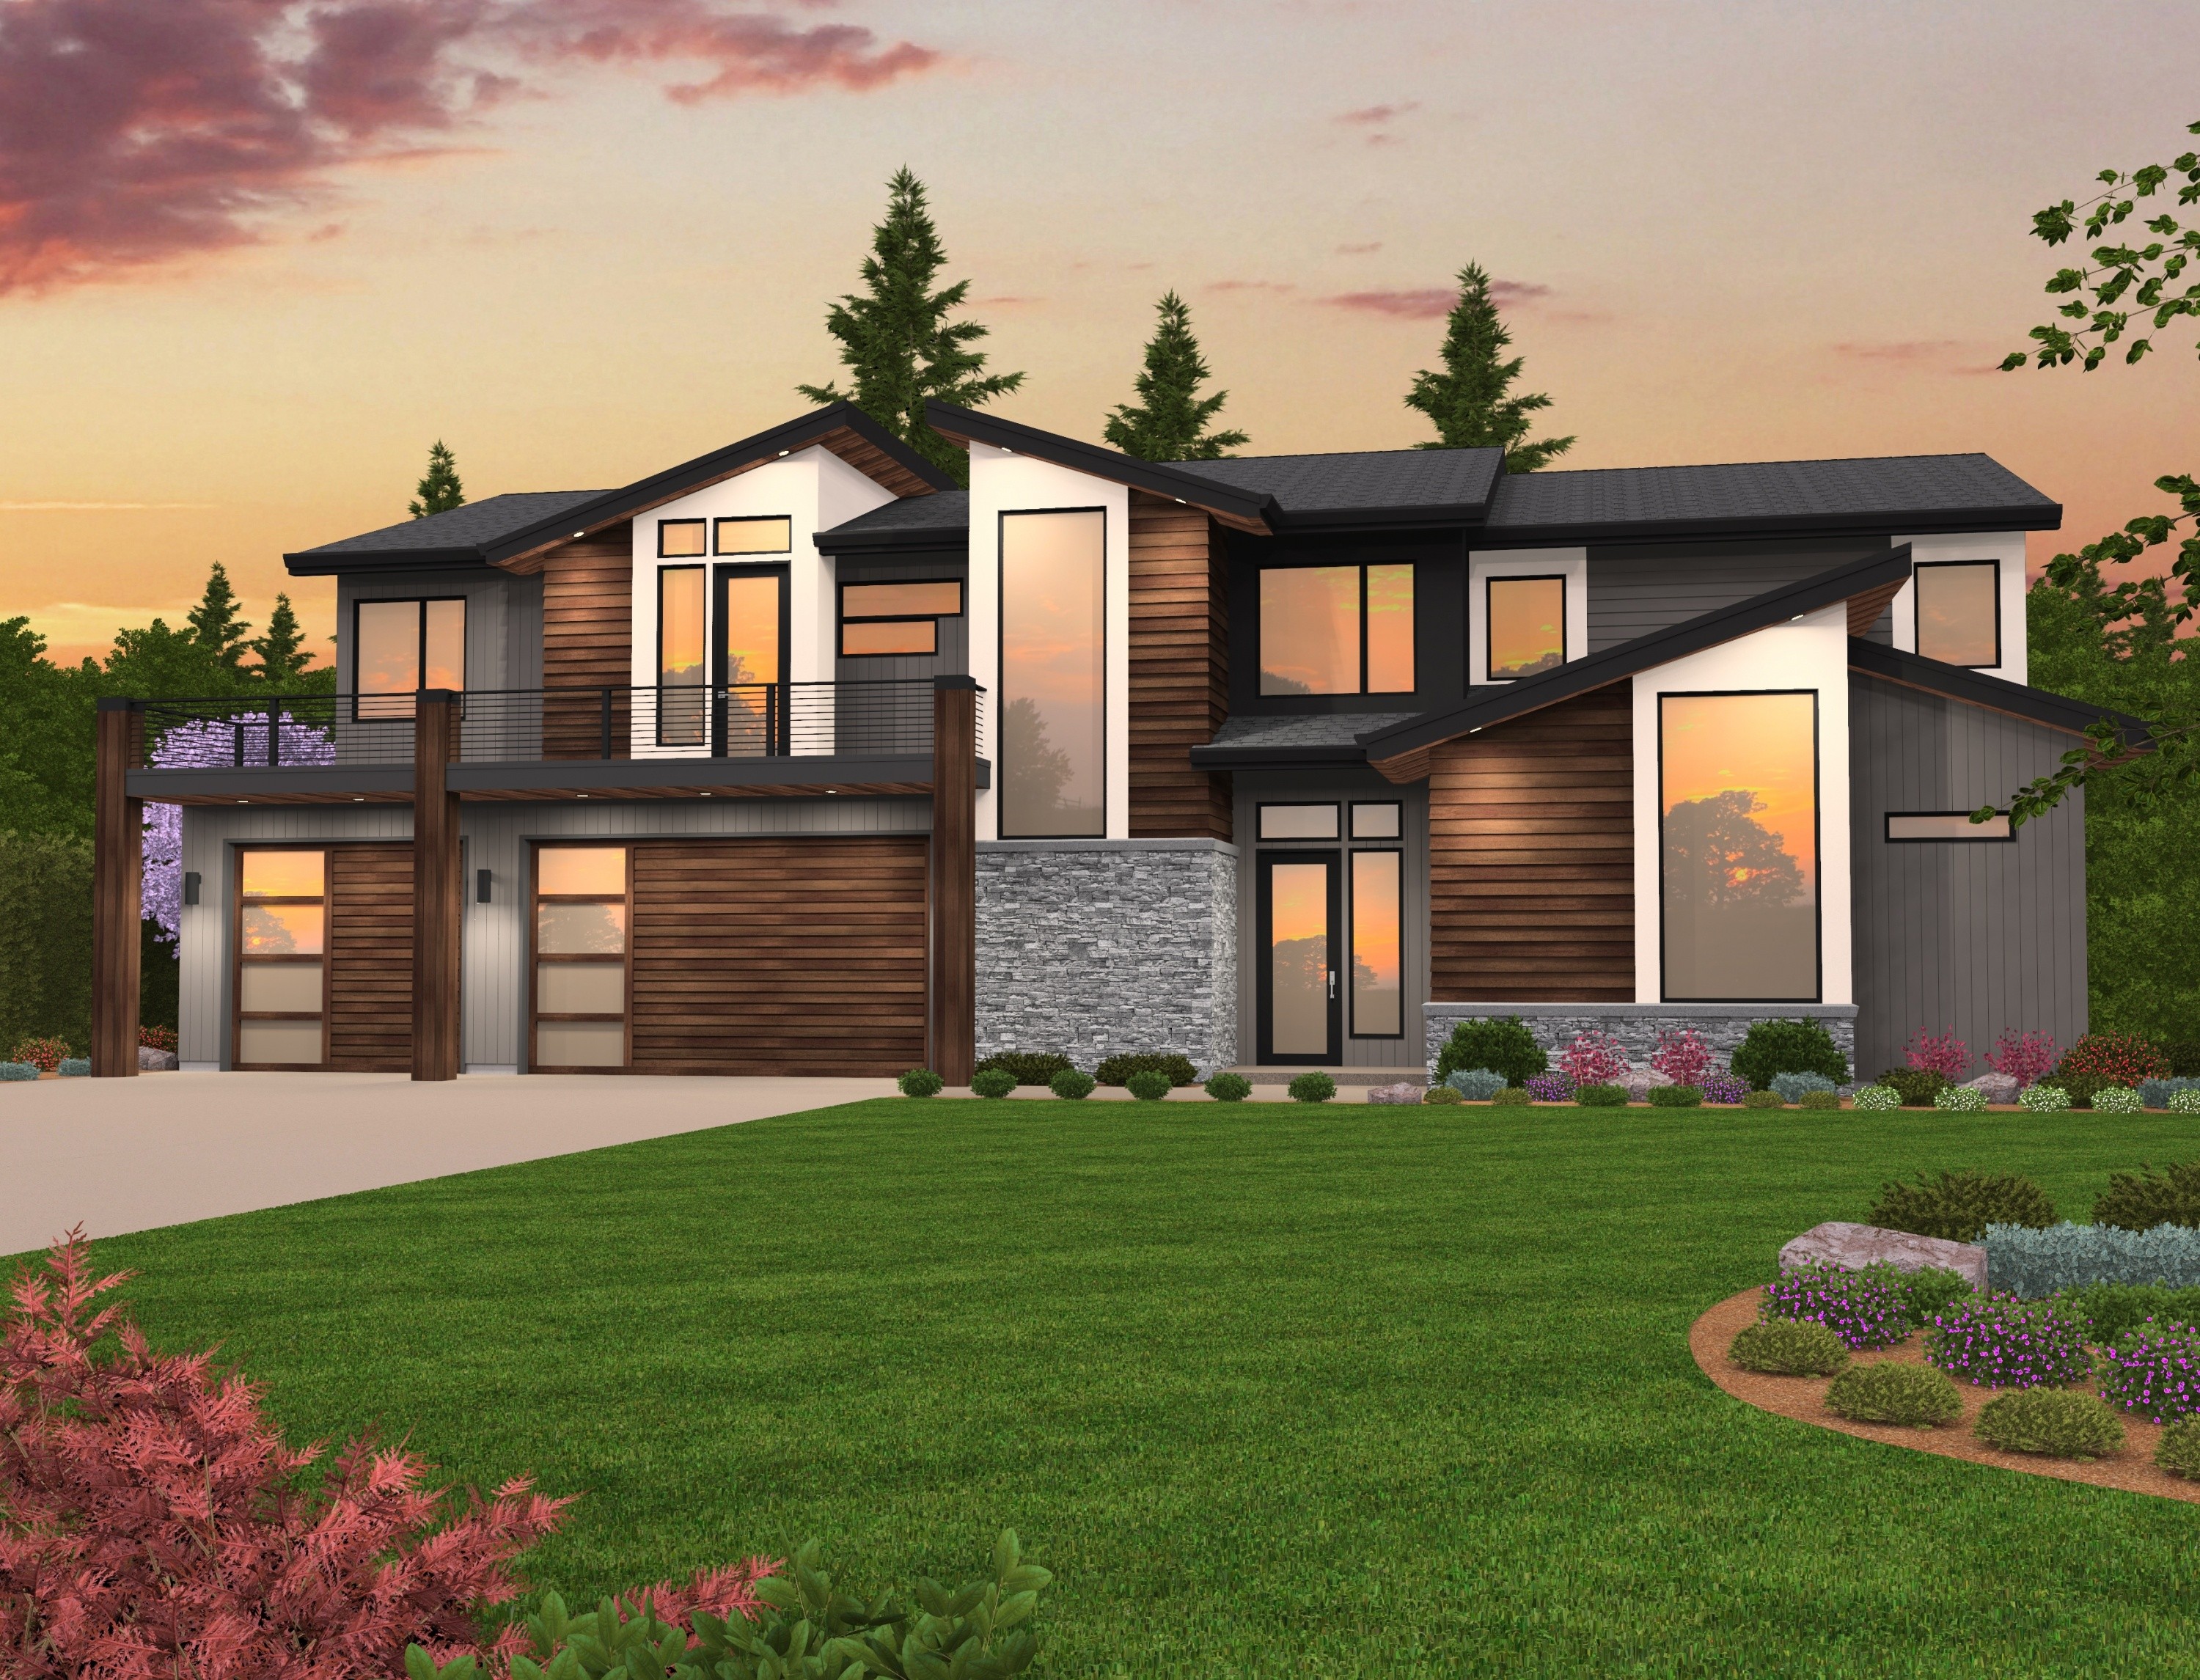 Be blown away by this Exciting Two Story Modern Home Design.